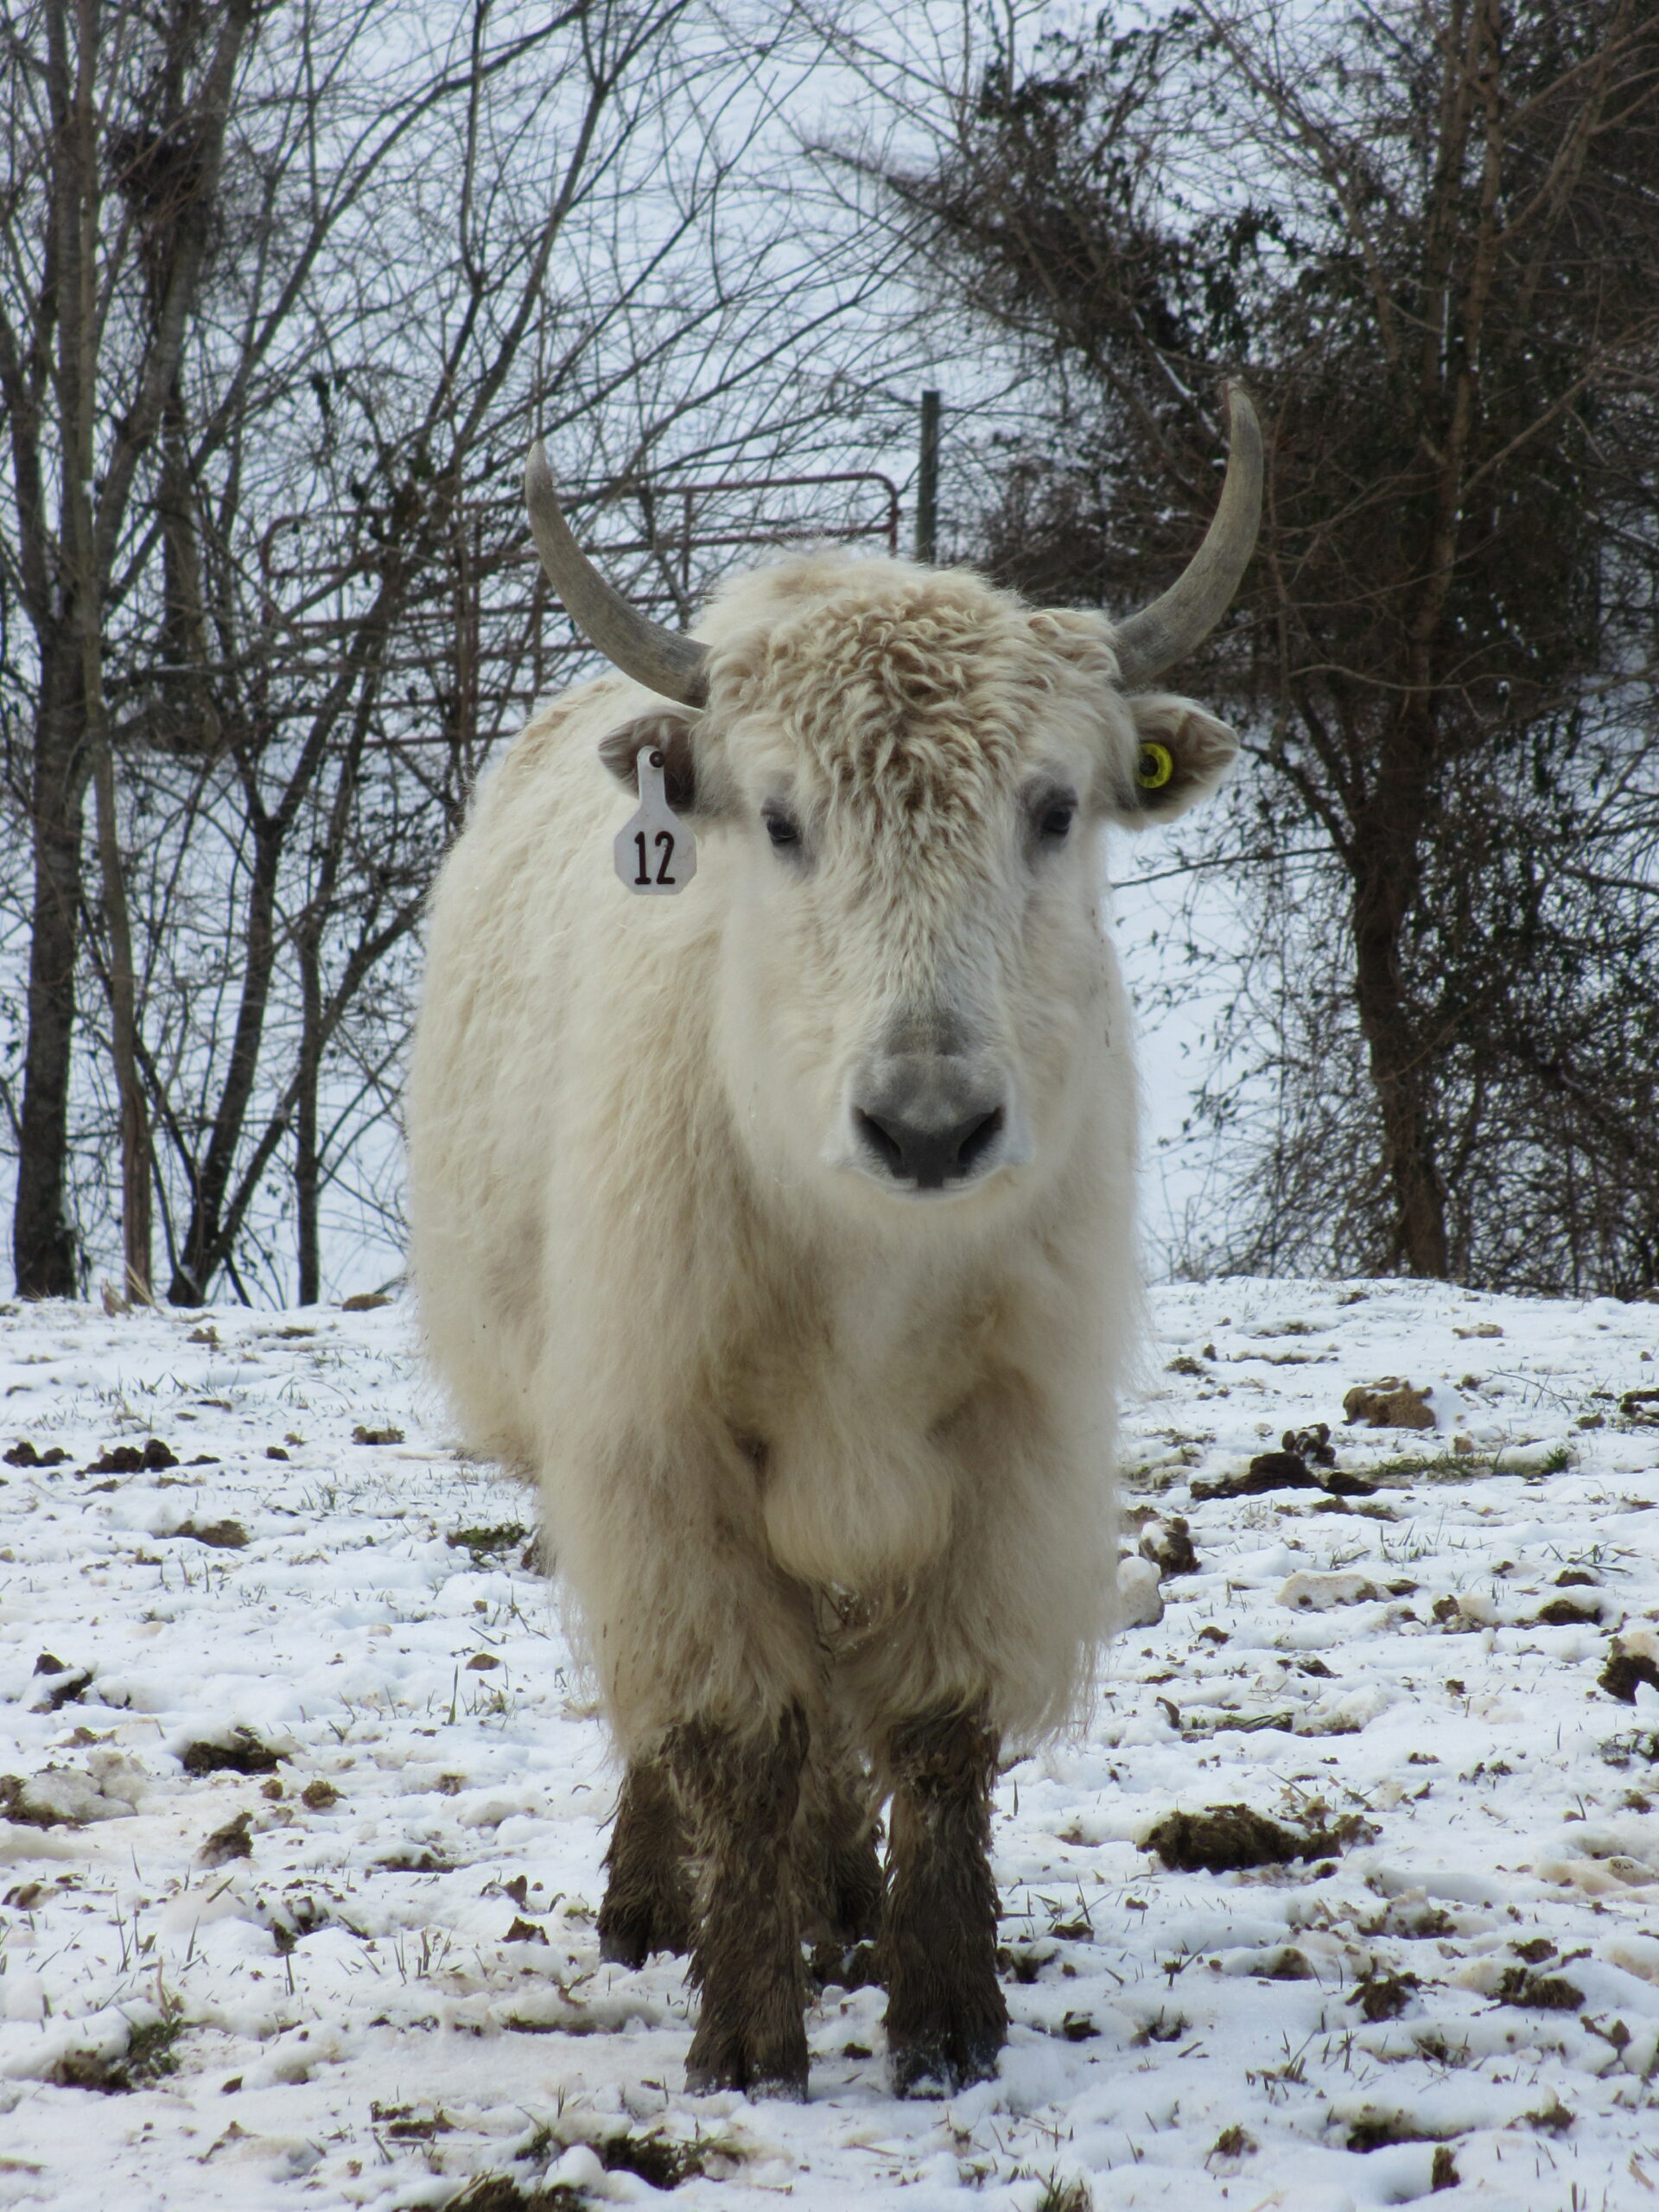 A white yak looking at the camera in the snow